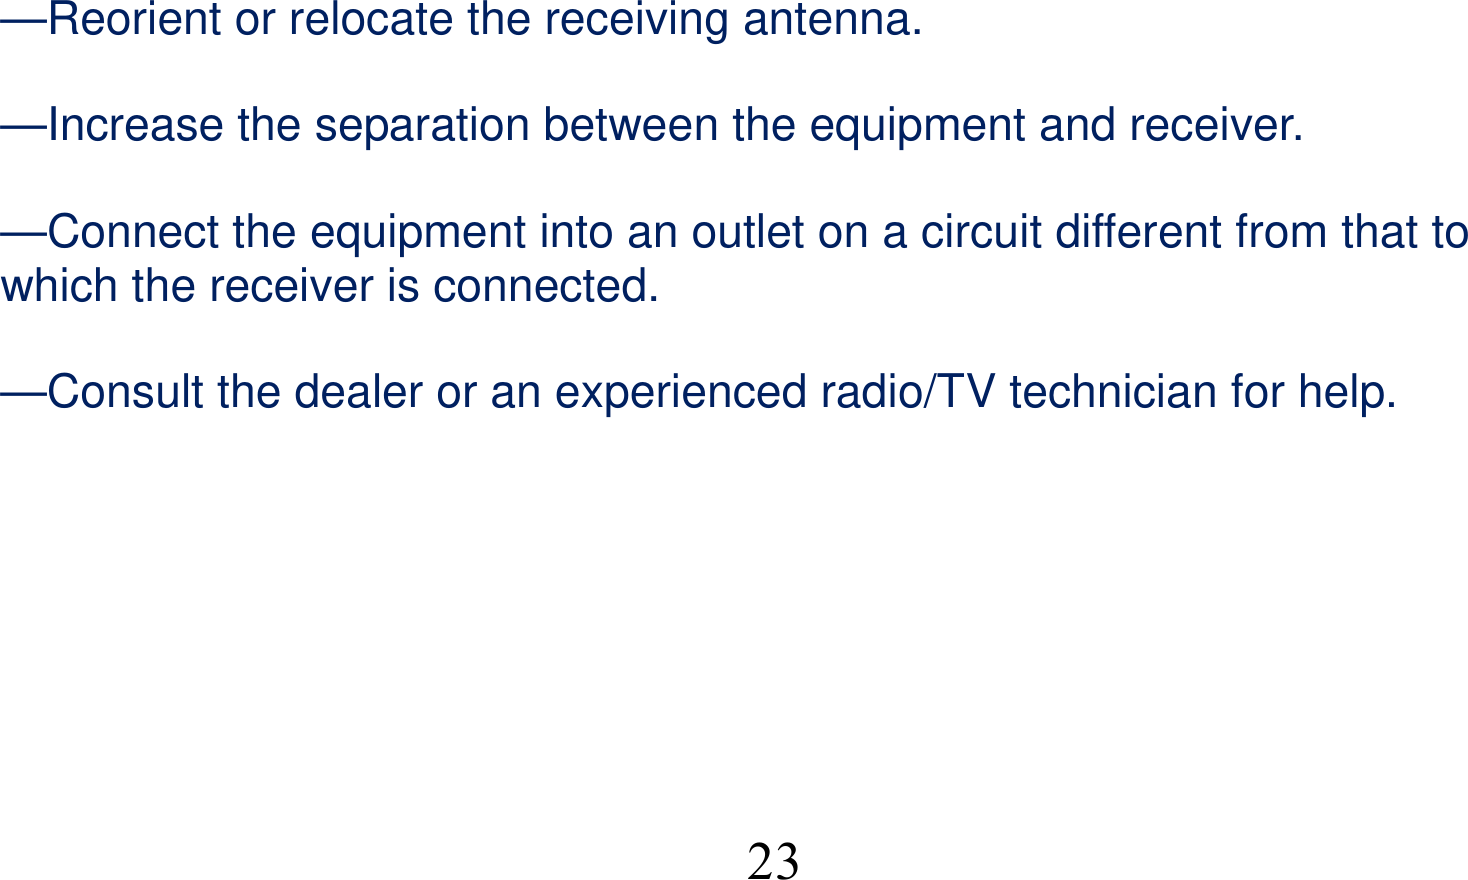  23—Reorient or relocate the receiving antenna.      —Increase the separation between the equipment and receiver.      —Connect the equipment into an outlet on a circuit different from that to which the receiver is connected.      —Consult the dealer or an experienced radio/TV technician for help.     